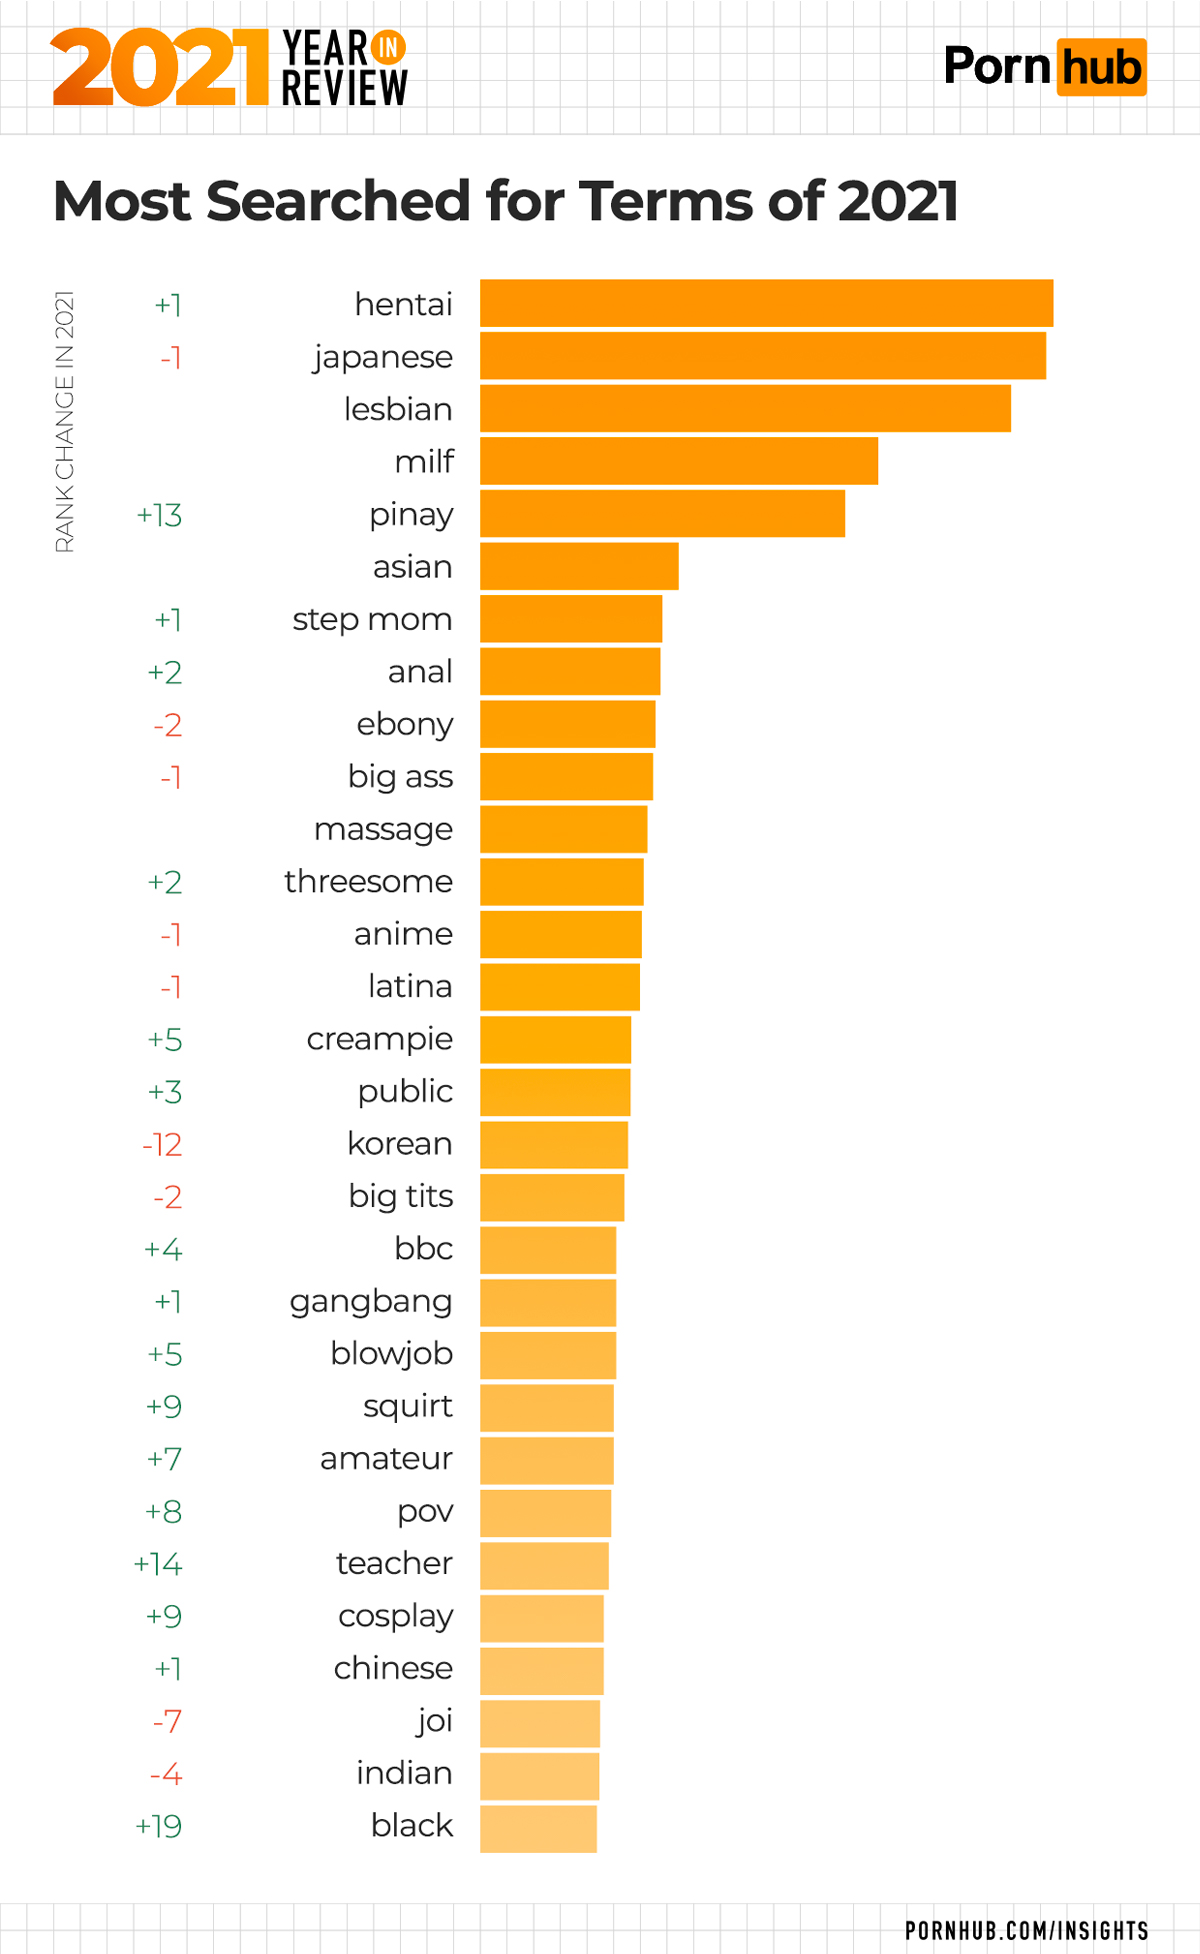 Www 2c Porm Com - Pornhub Year in Review Reveals Most Searched For Terms | Man of Many